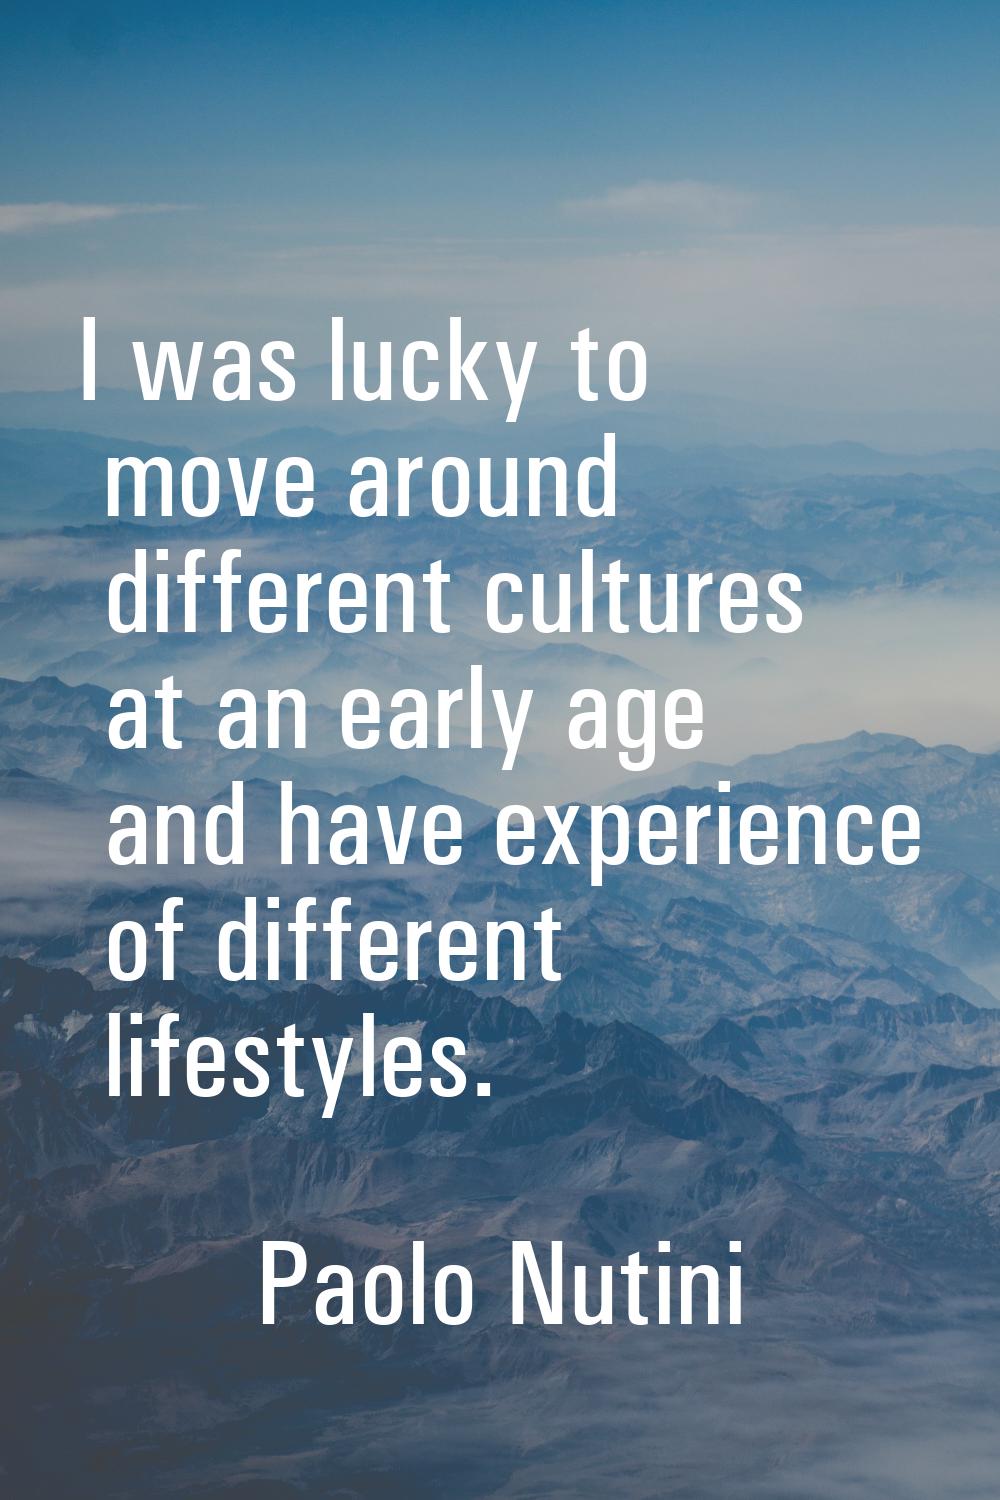 I was lucky to move around different cultures at an early age and have experience of different life